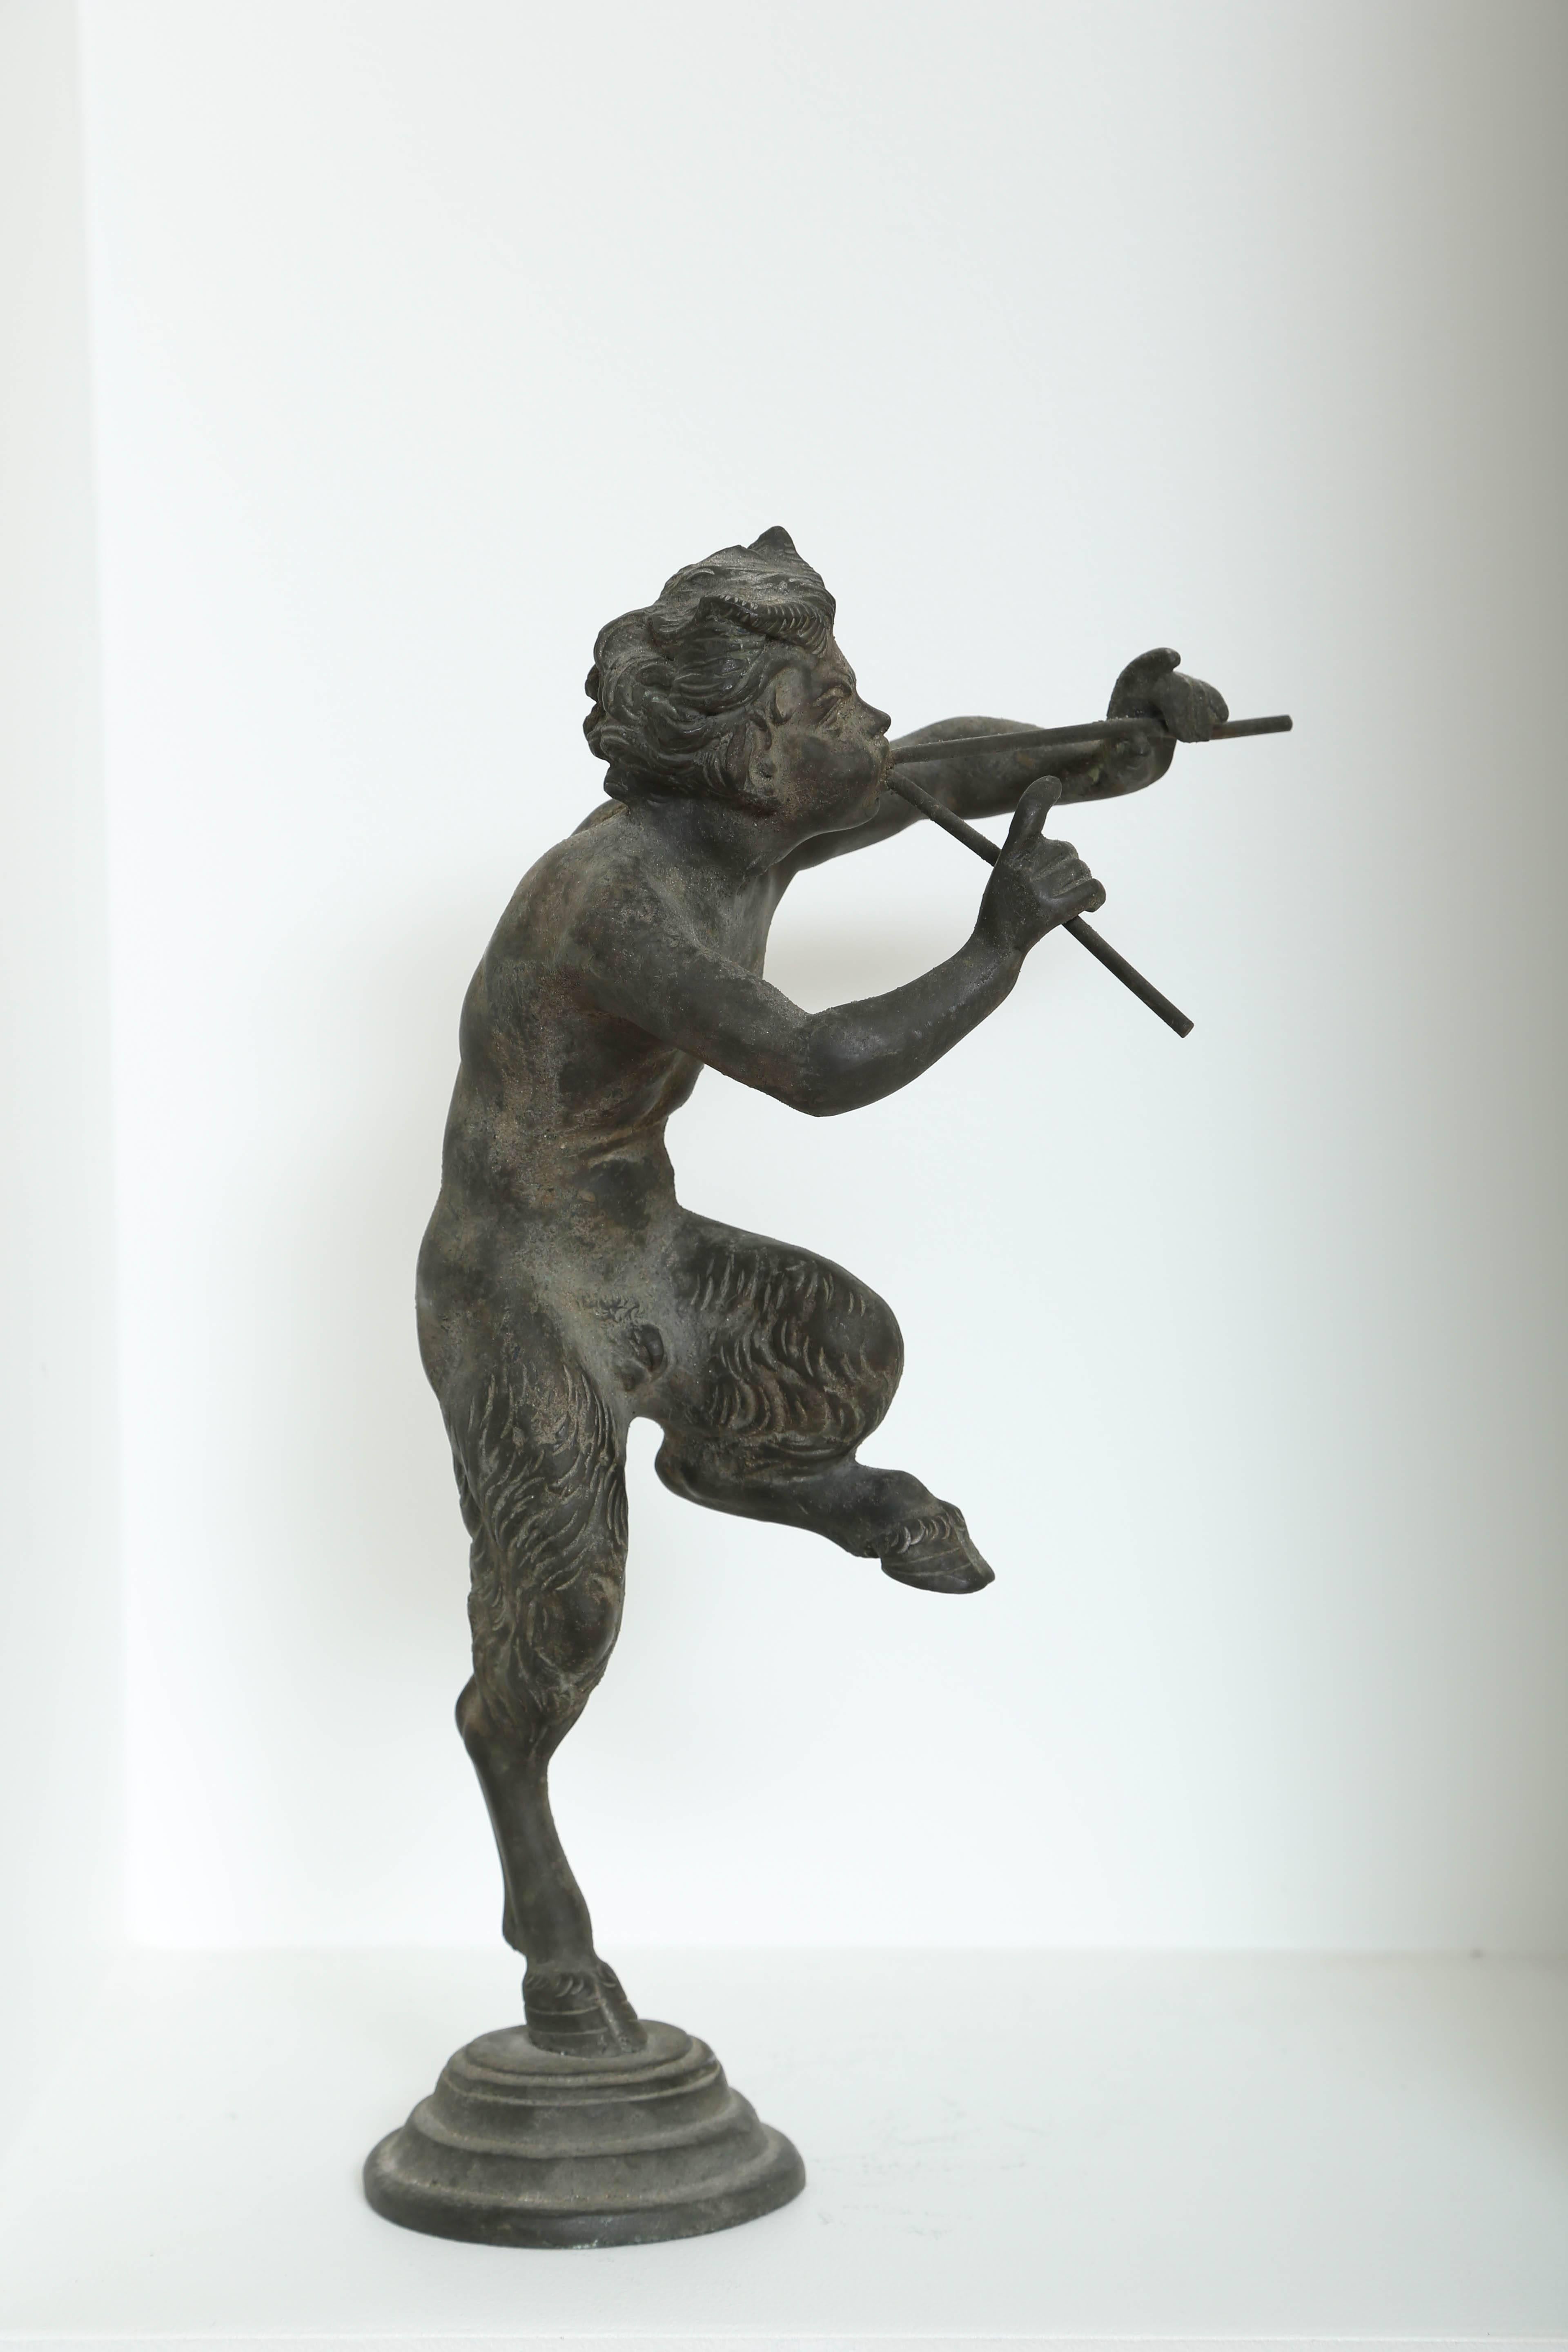 Rare antique bronze statue of Pan the Greek/Roman fertility God of the forest, from the personal collection of Juan March of the Fundación Juan March (Juan March Foundation). The sculpture features Pan half-man, half-goat playing a pair of flutes.